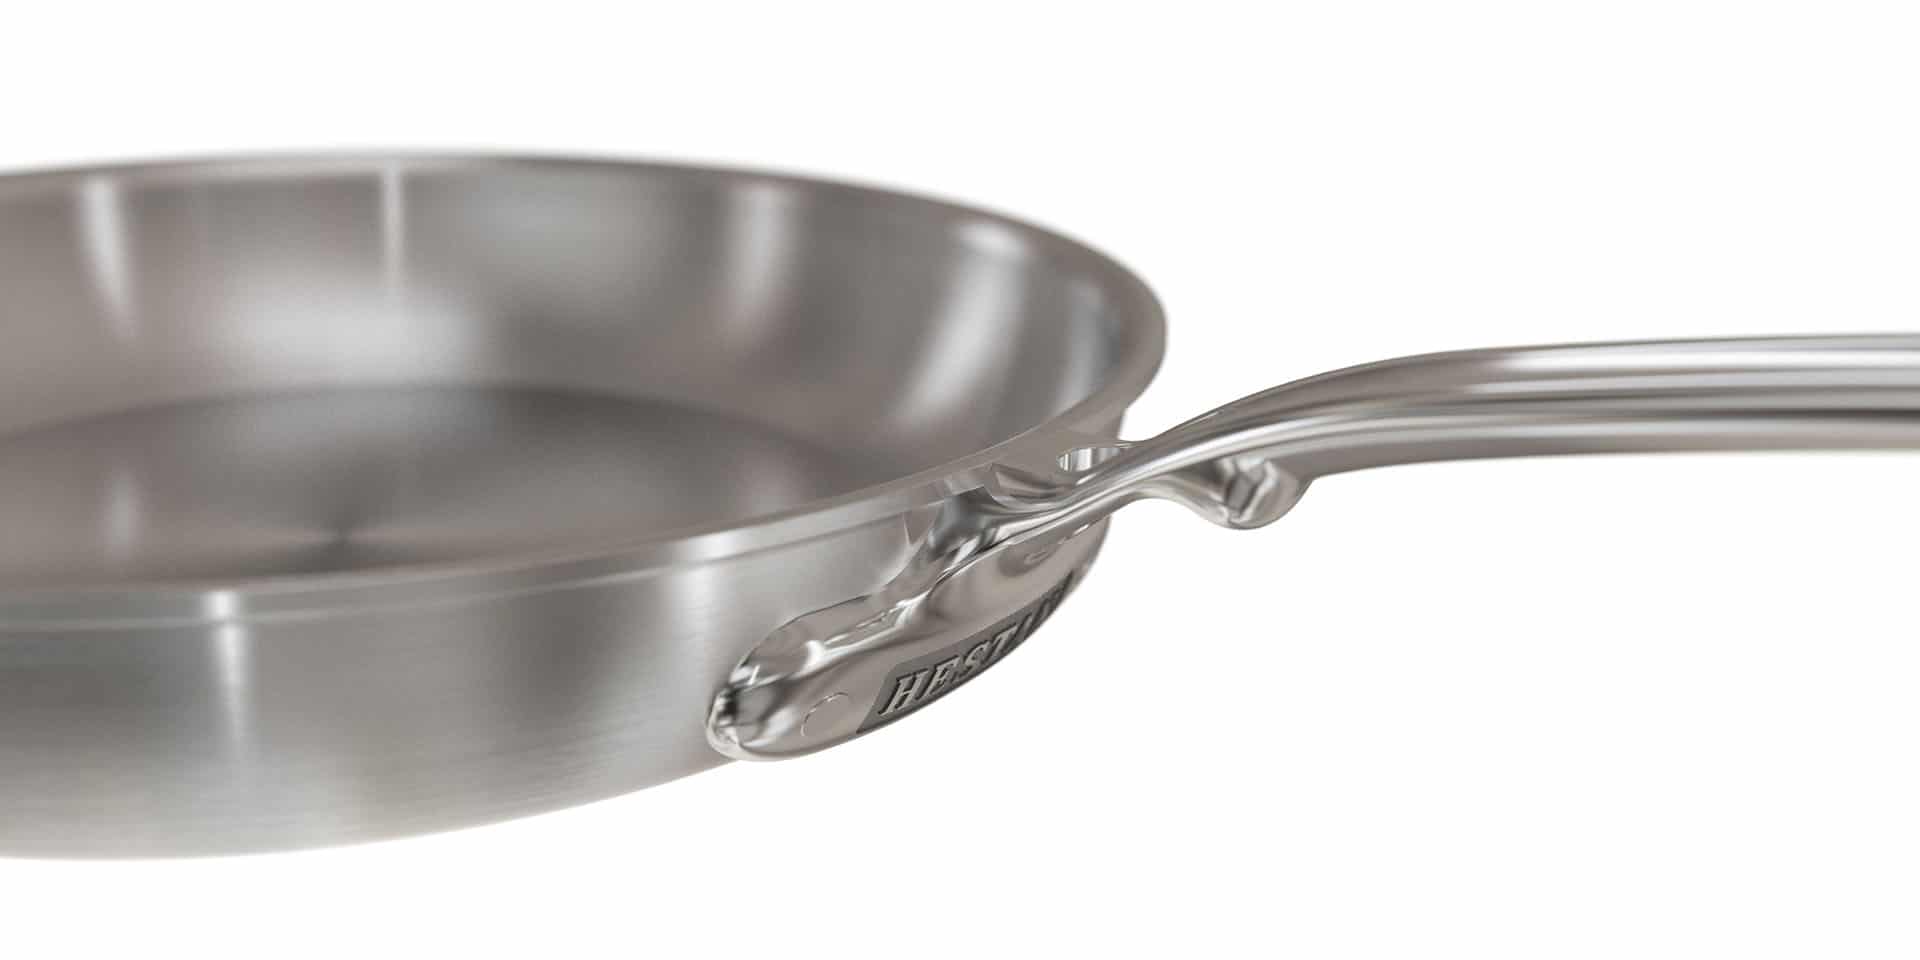 Photorealistic 3D rendering for Hestan's Thomas Keller cookware line showing a close-up detail of the handle